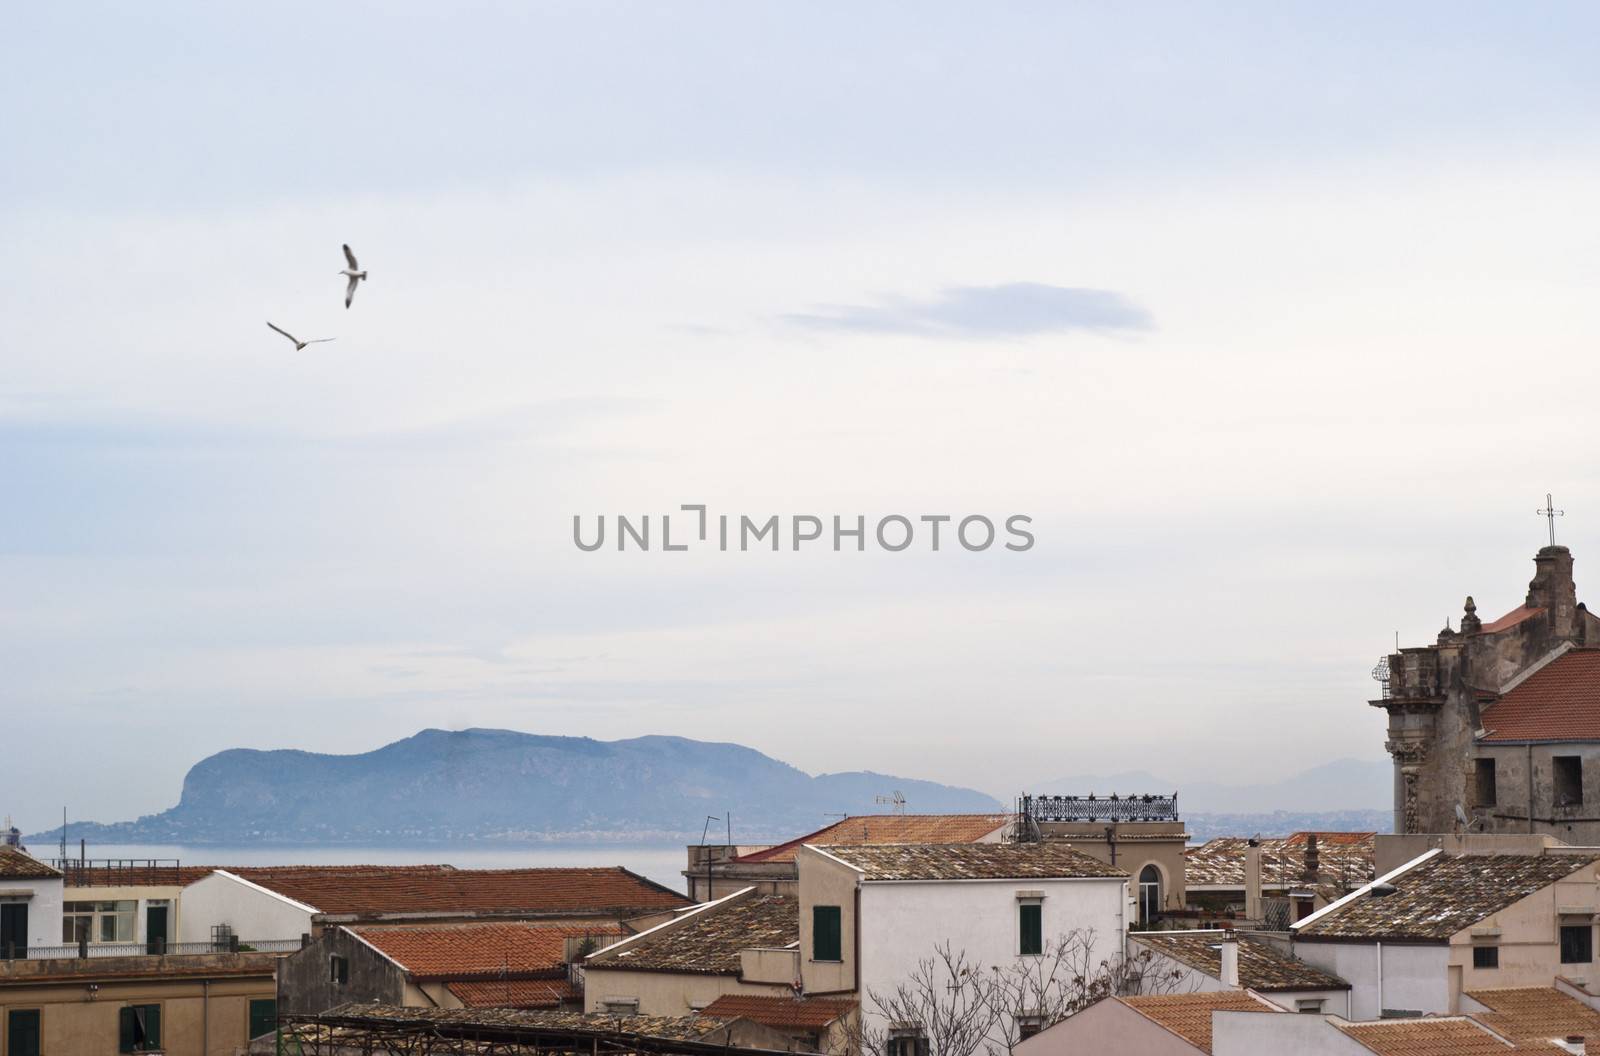 View of Palermo with roofs and seagulls by gandolfocannatella